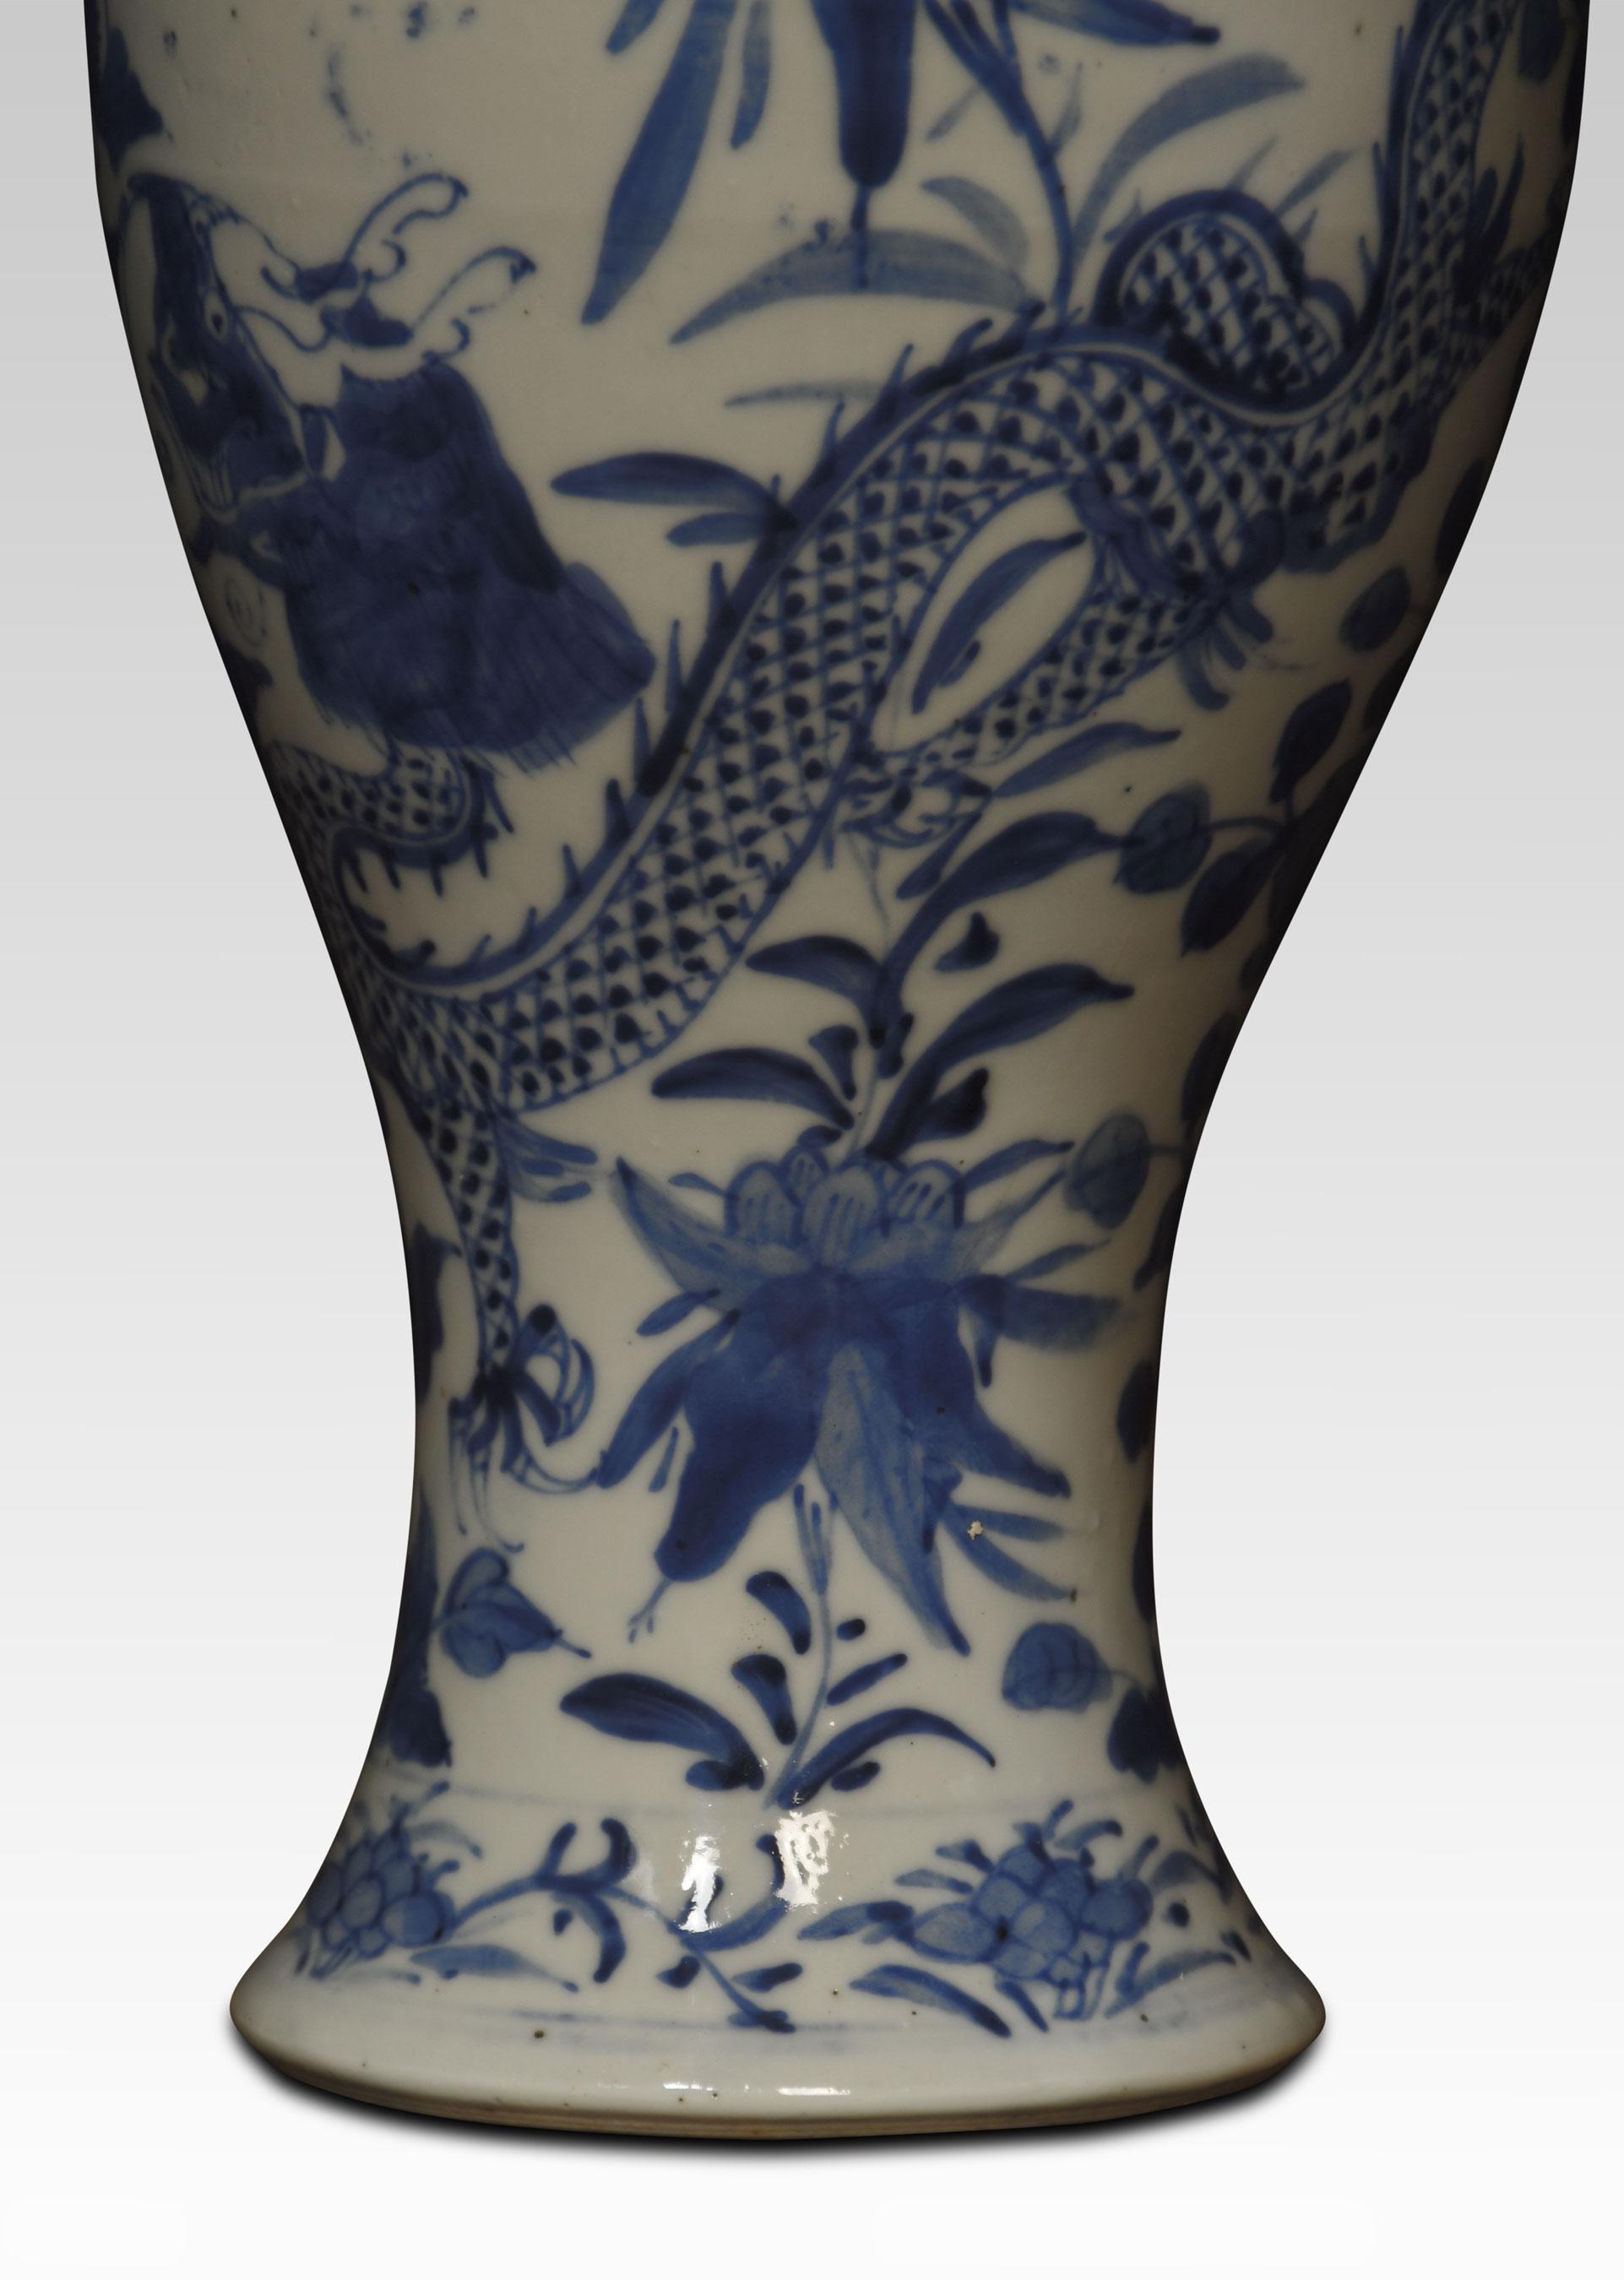 Chinese blue and white vase decorated with oriental dragons and foliage
Dimensions
Height 10.5 Inches
Width 5 Inches
Depth 5 Inches.